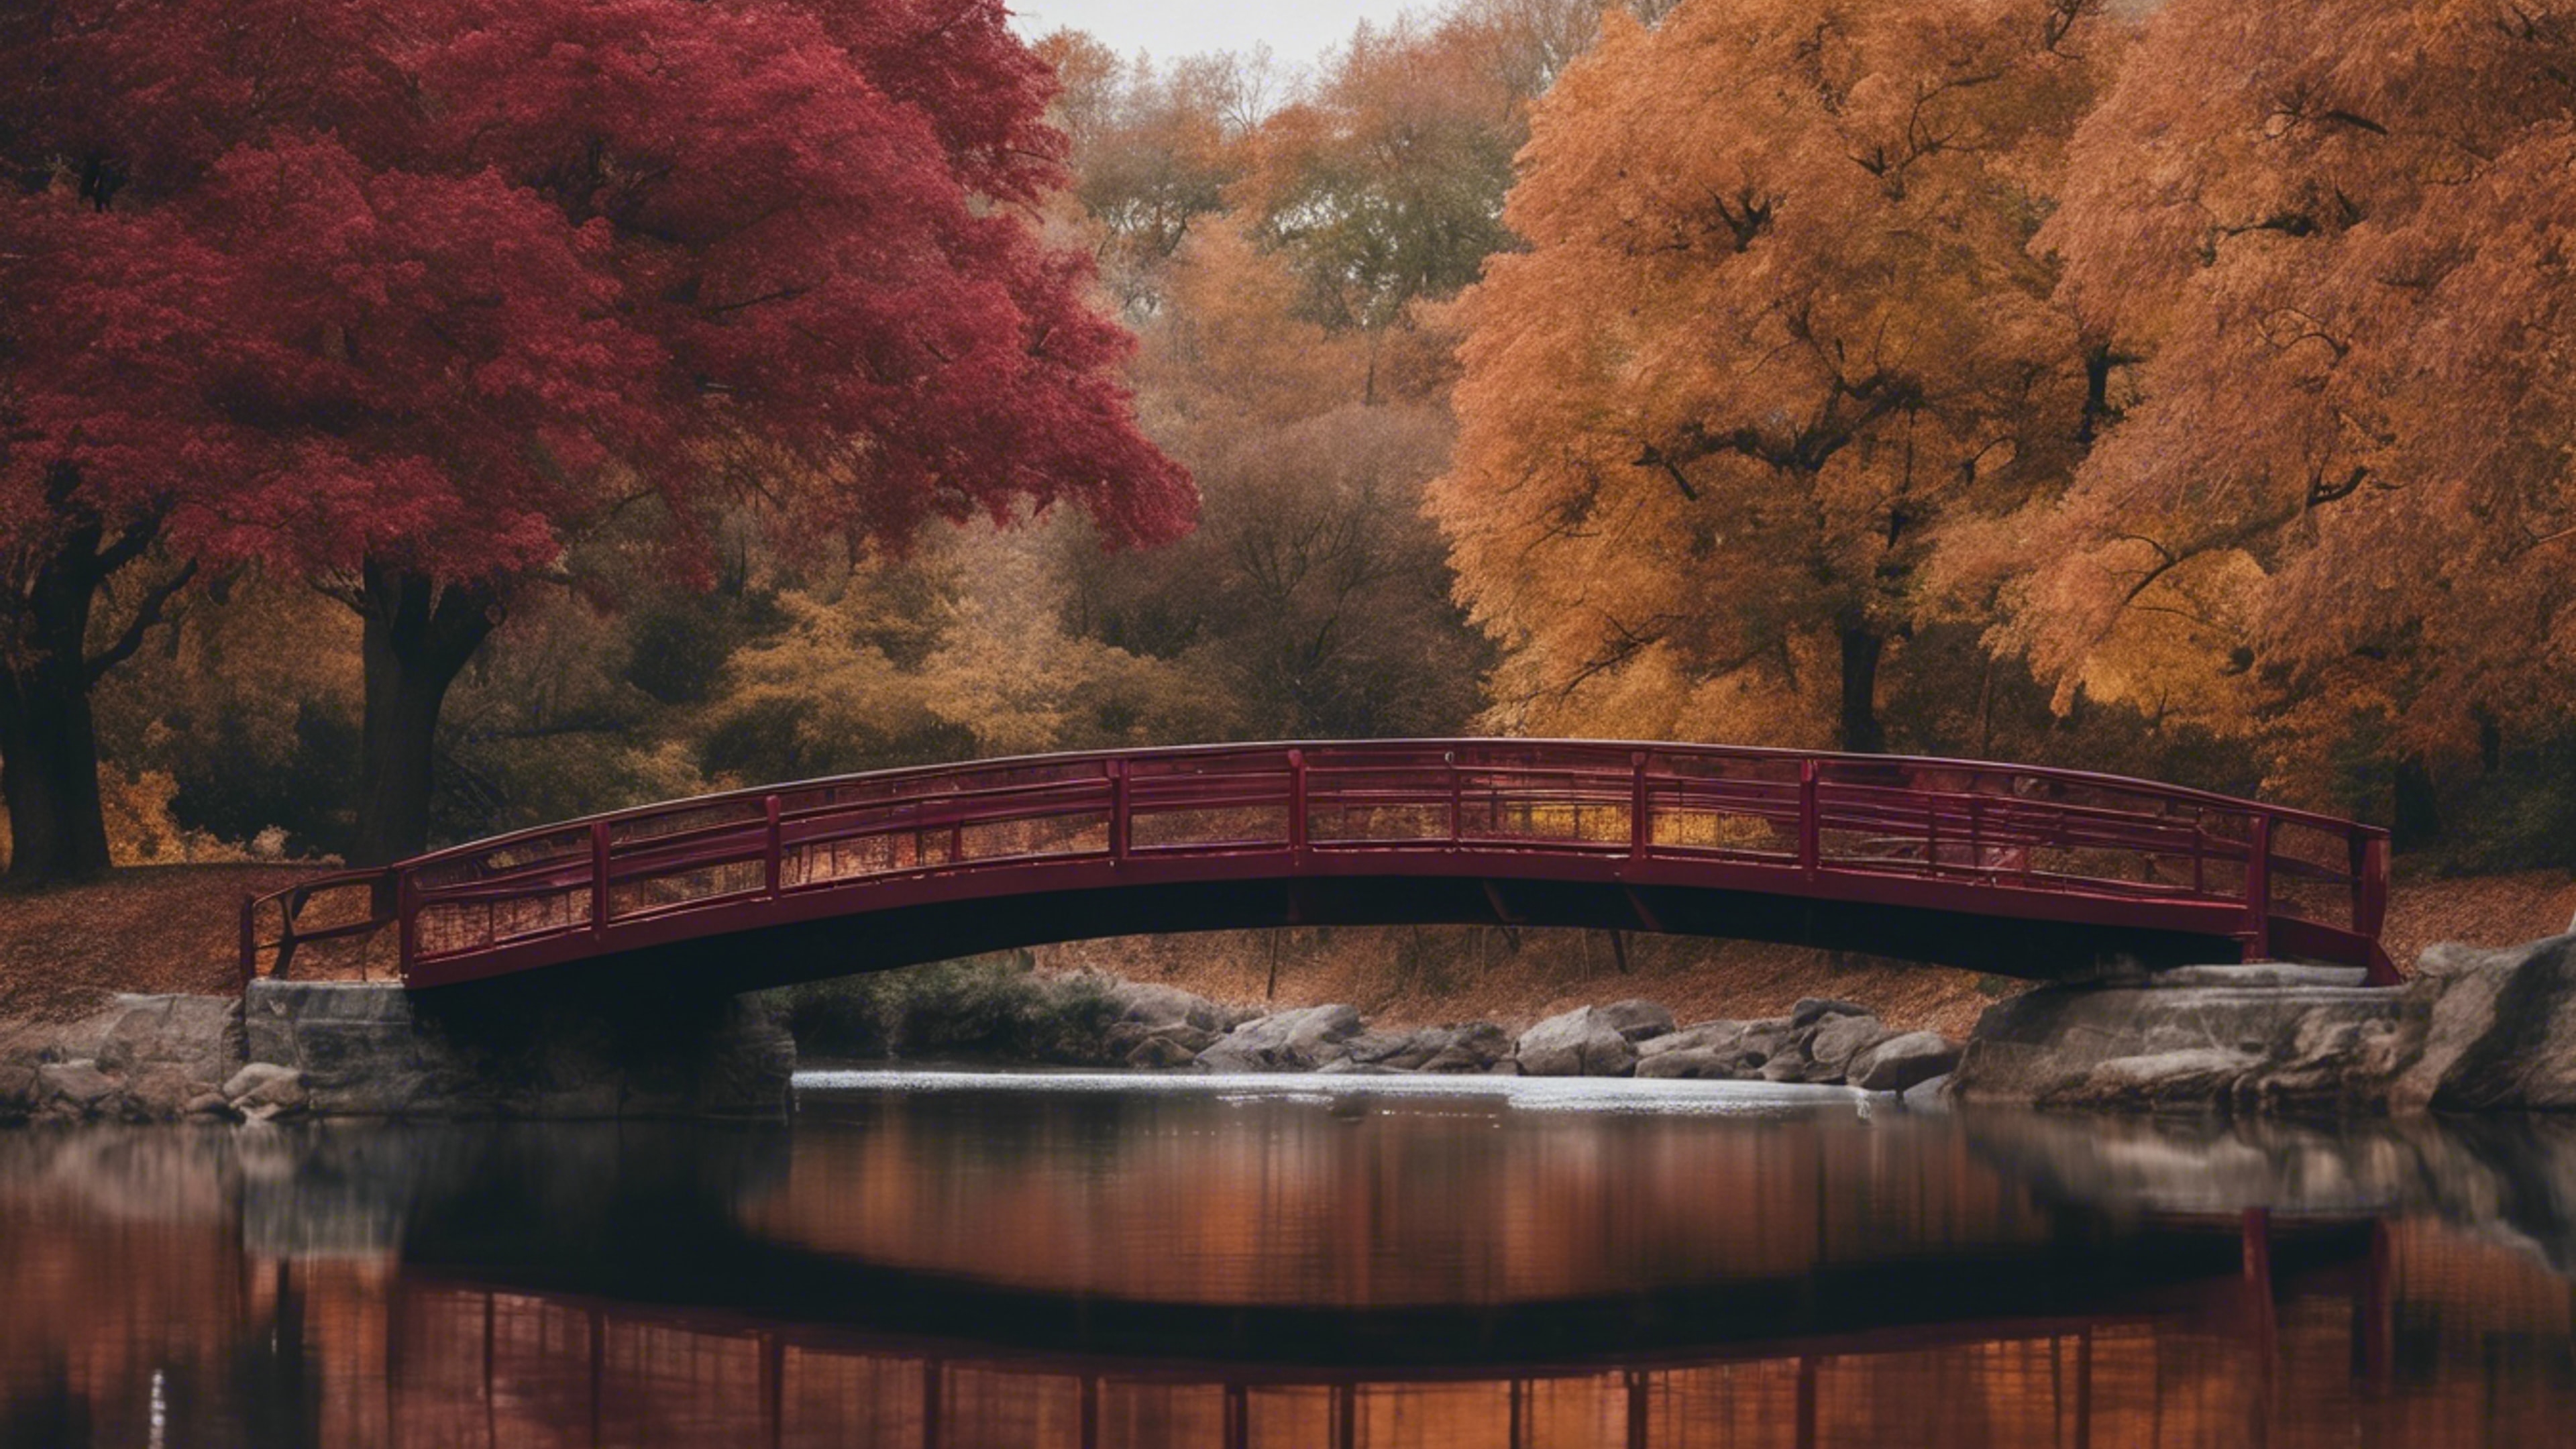 A cool maroon bridge stretching across a serene body of water during autumn.壁紙[2439a57023814040ad60]